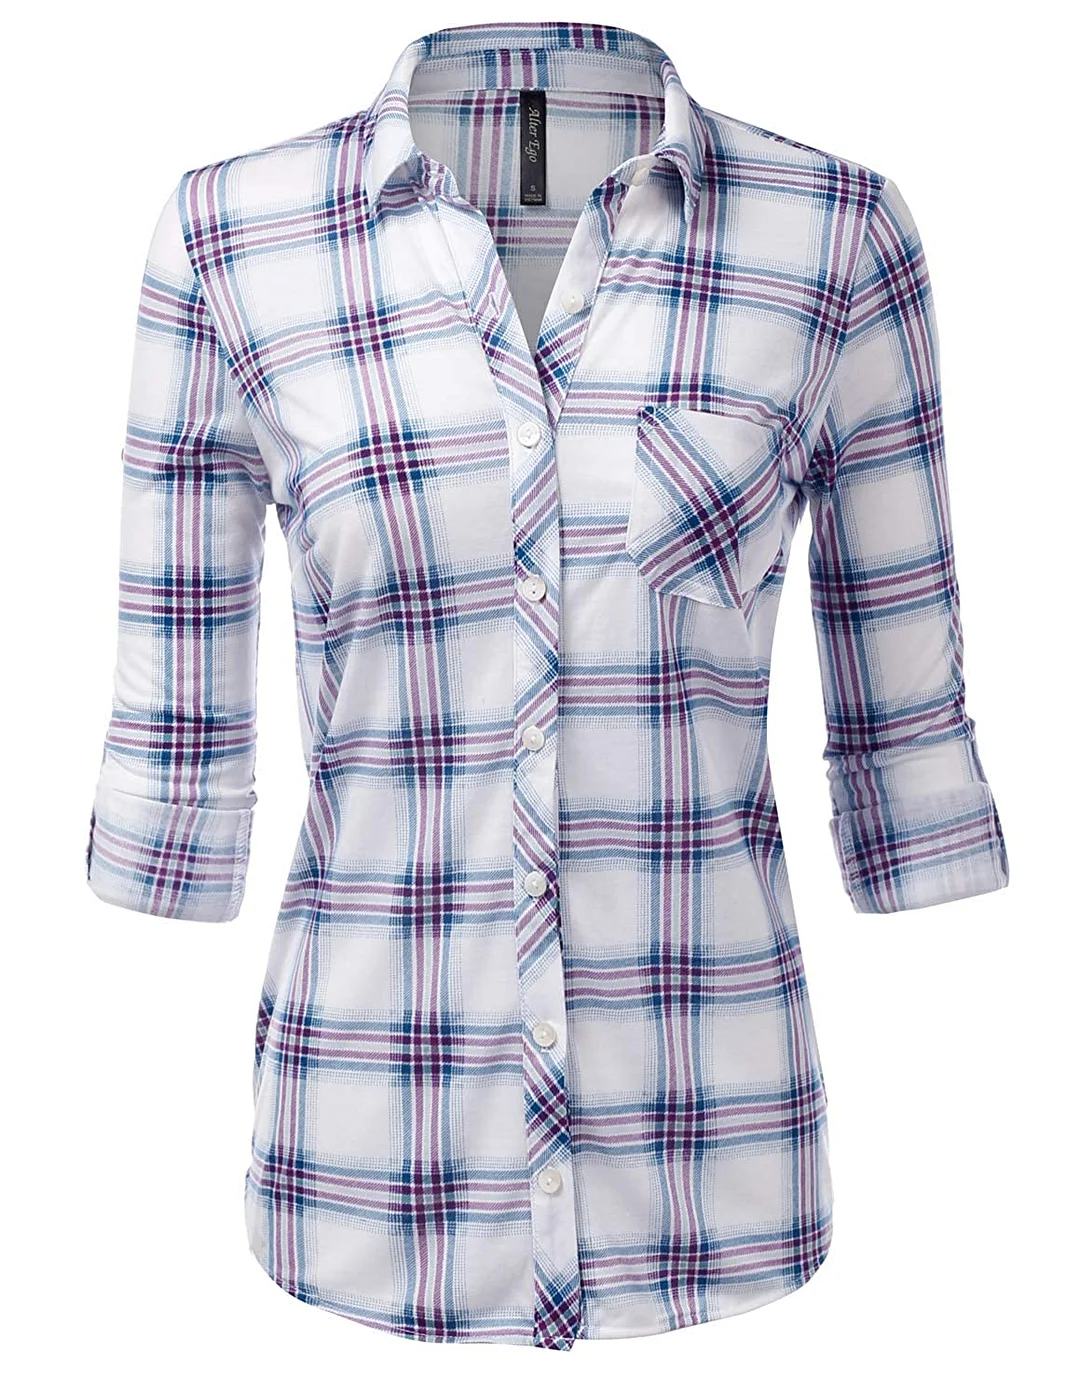 JJ Perfection Women's Long Sleeve Collared Button Down Plaid Flannel Shirt